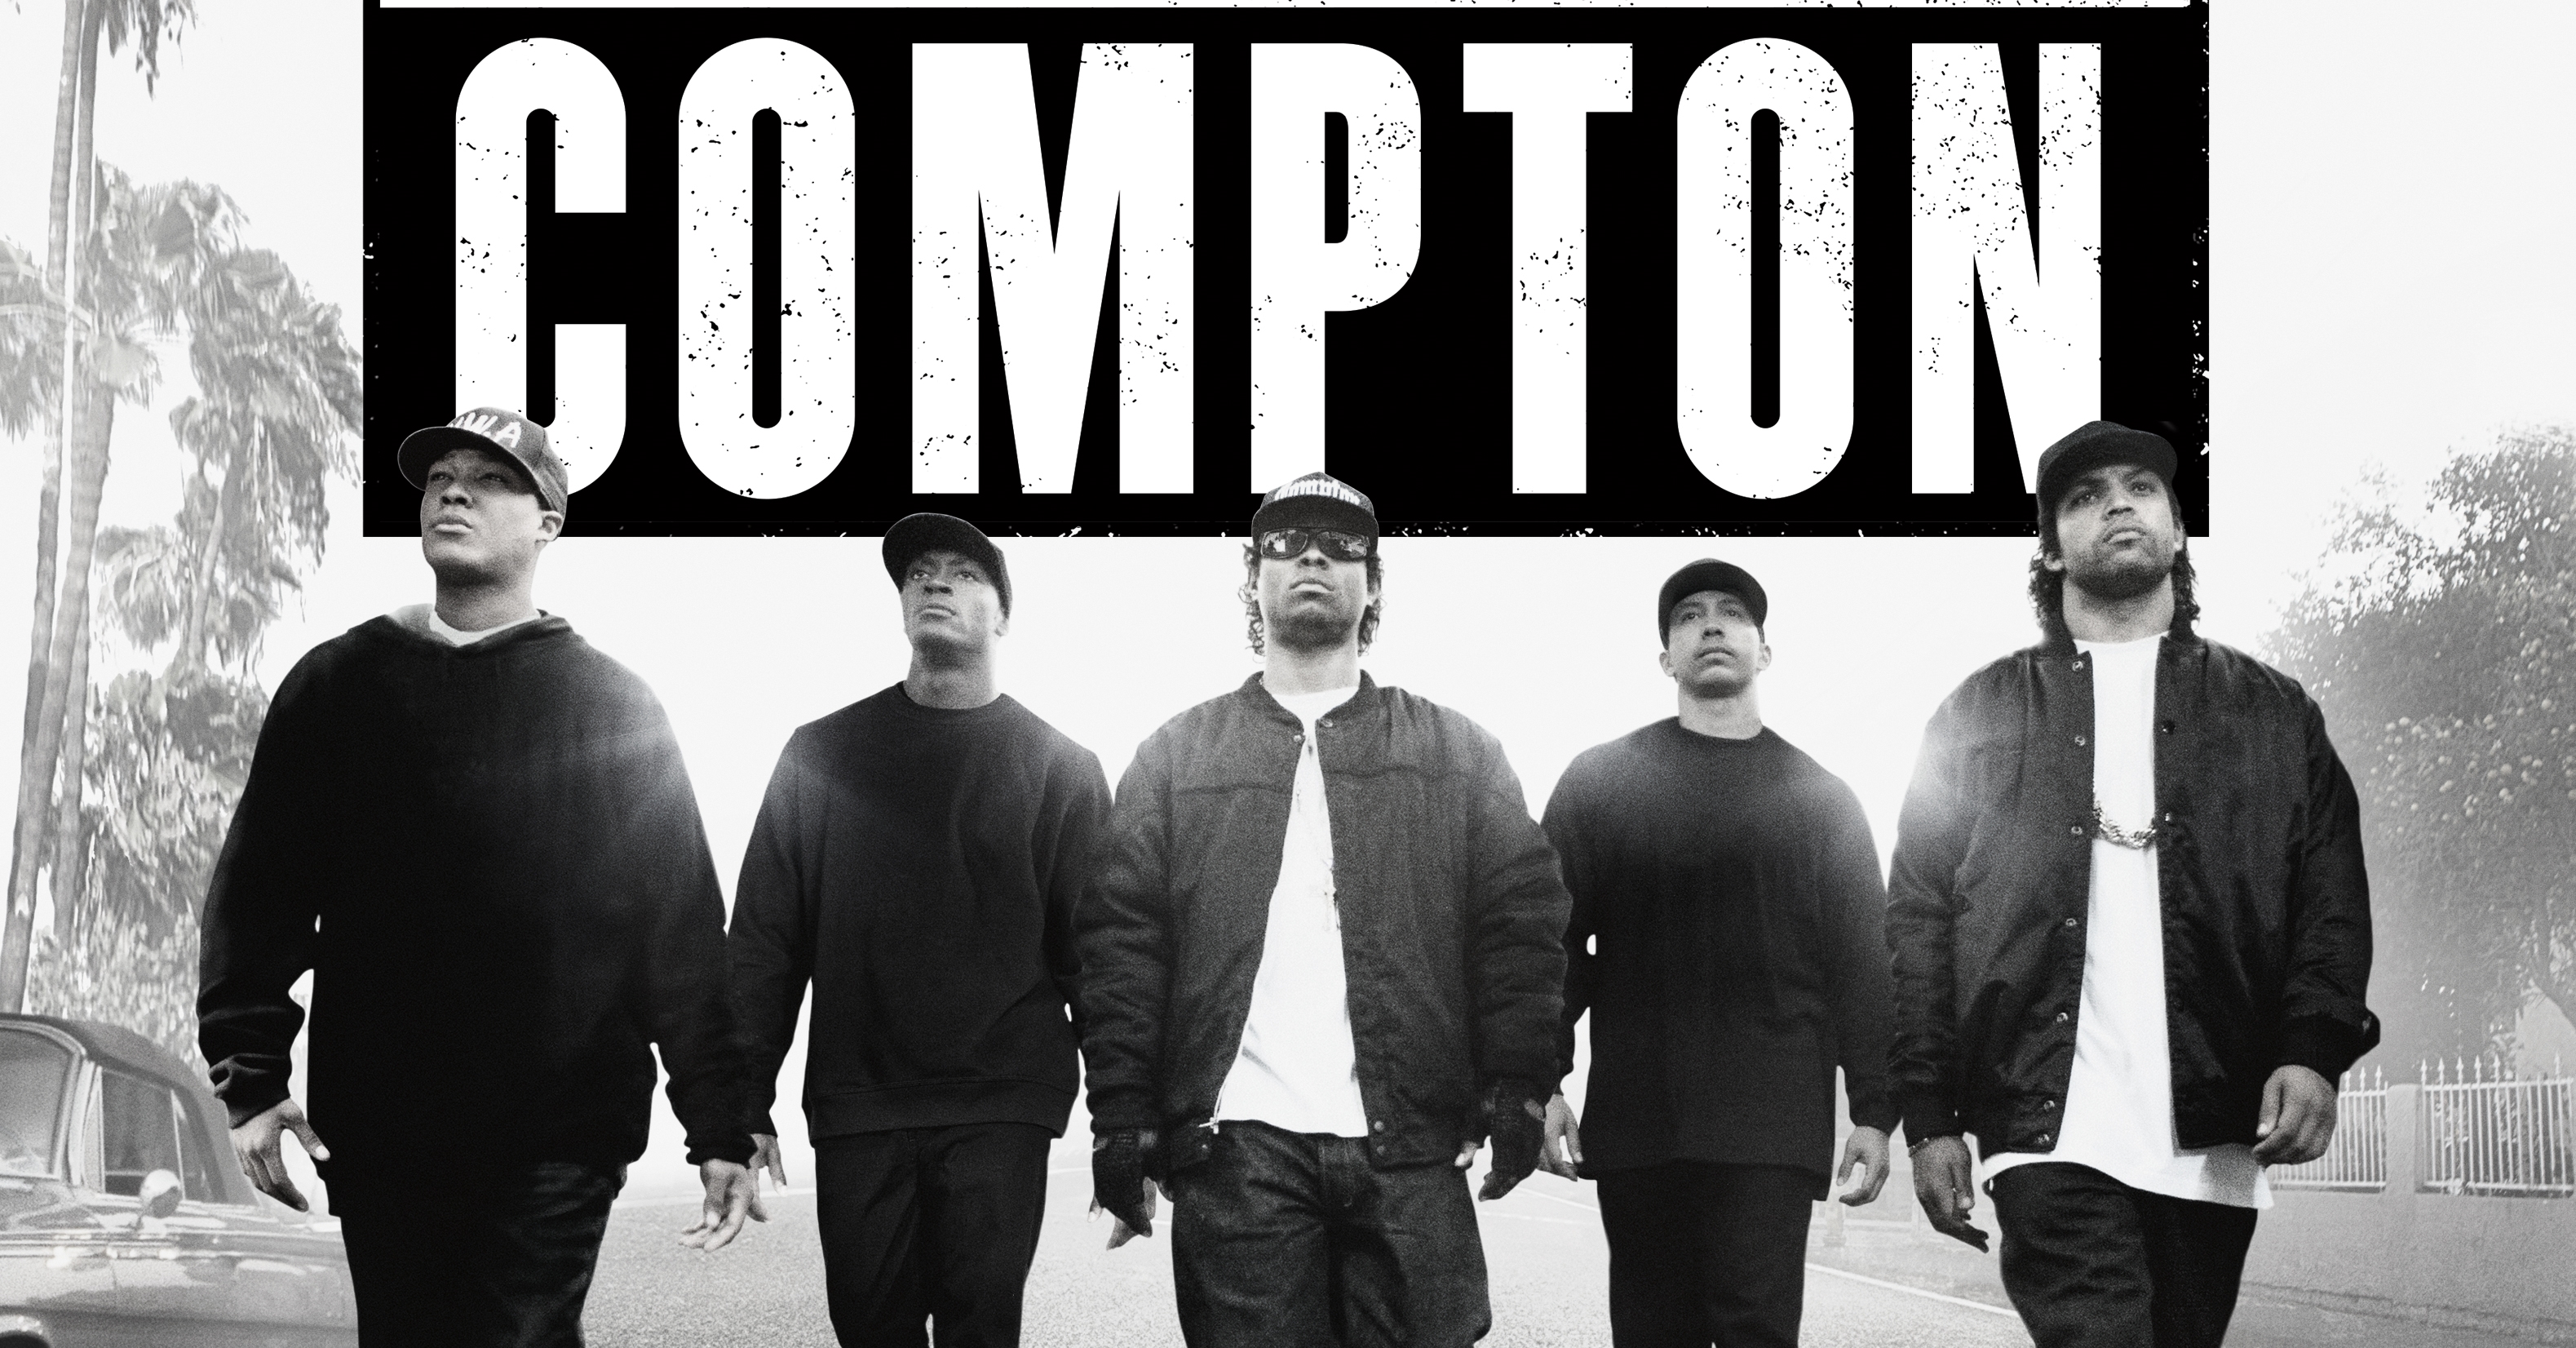 STRAIGHT OUTTA COMPTON opens August 14.